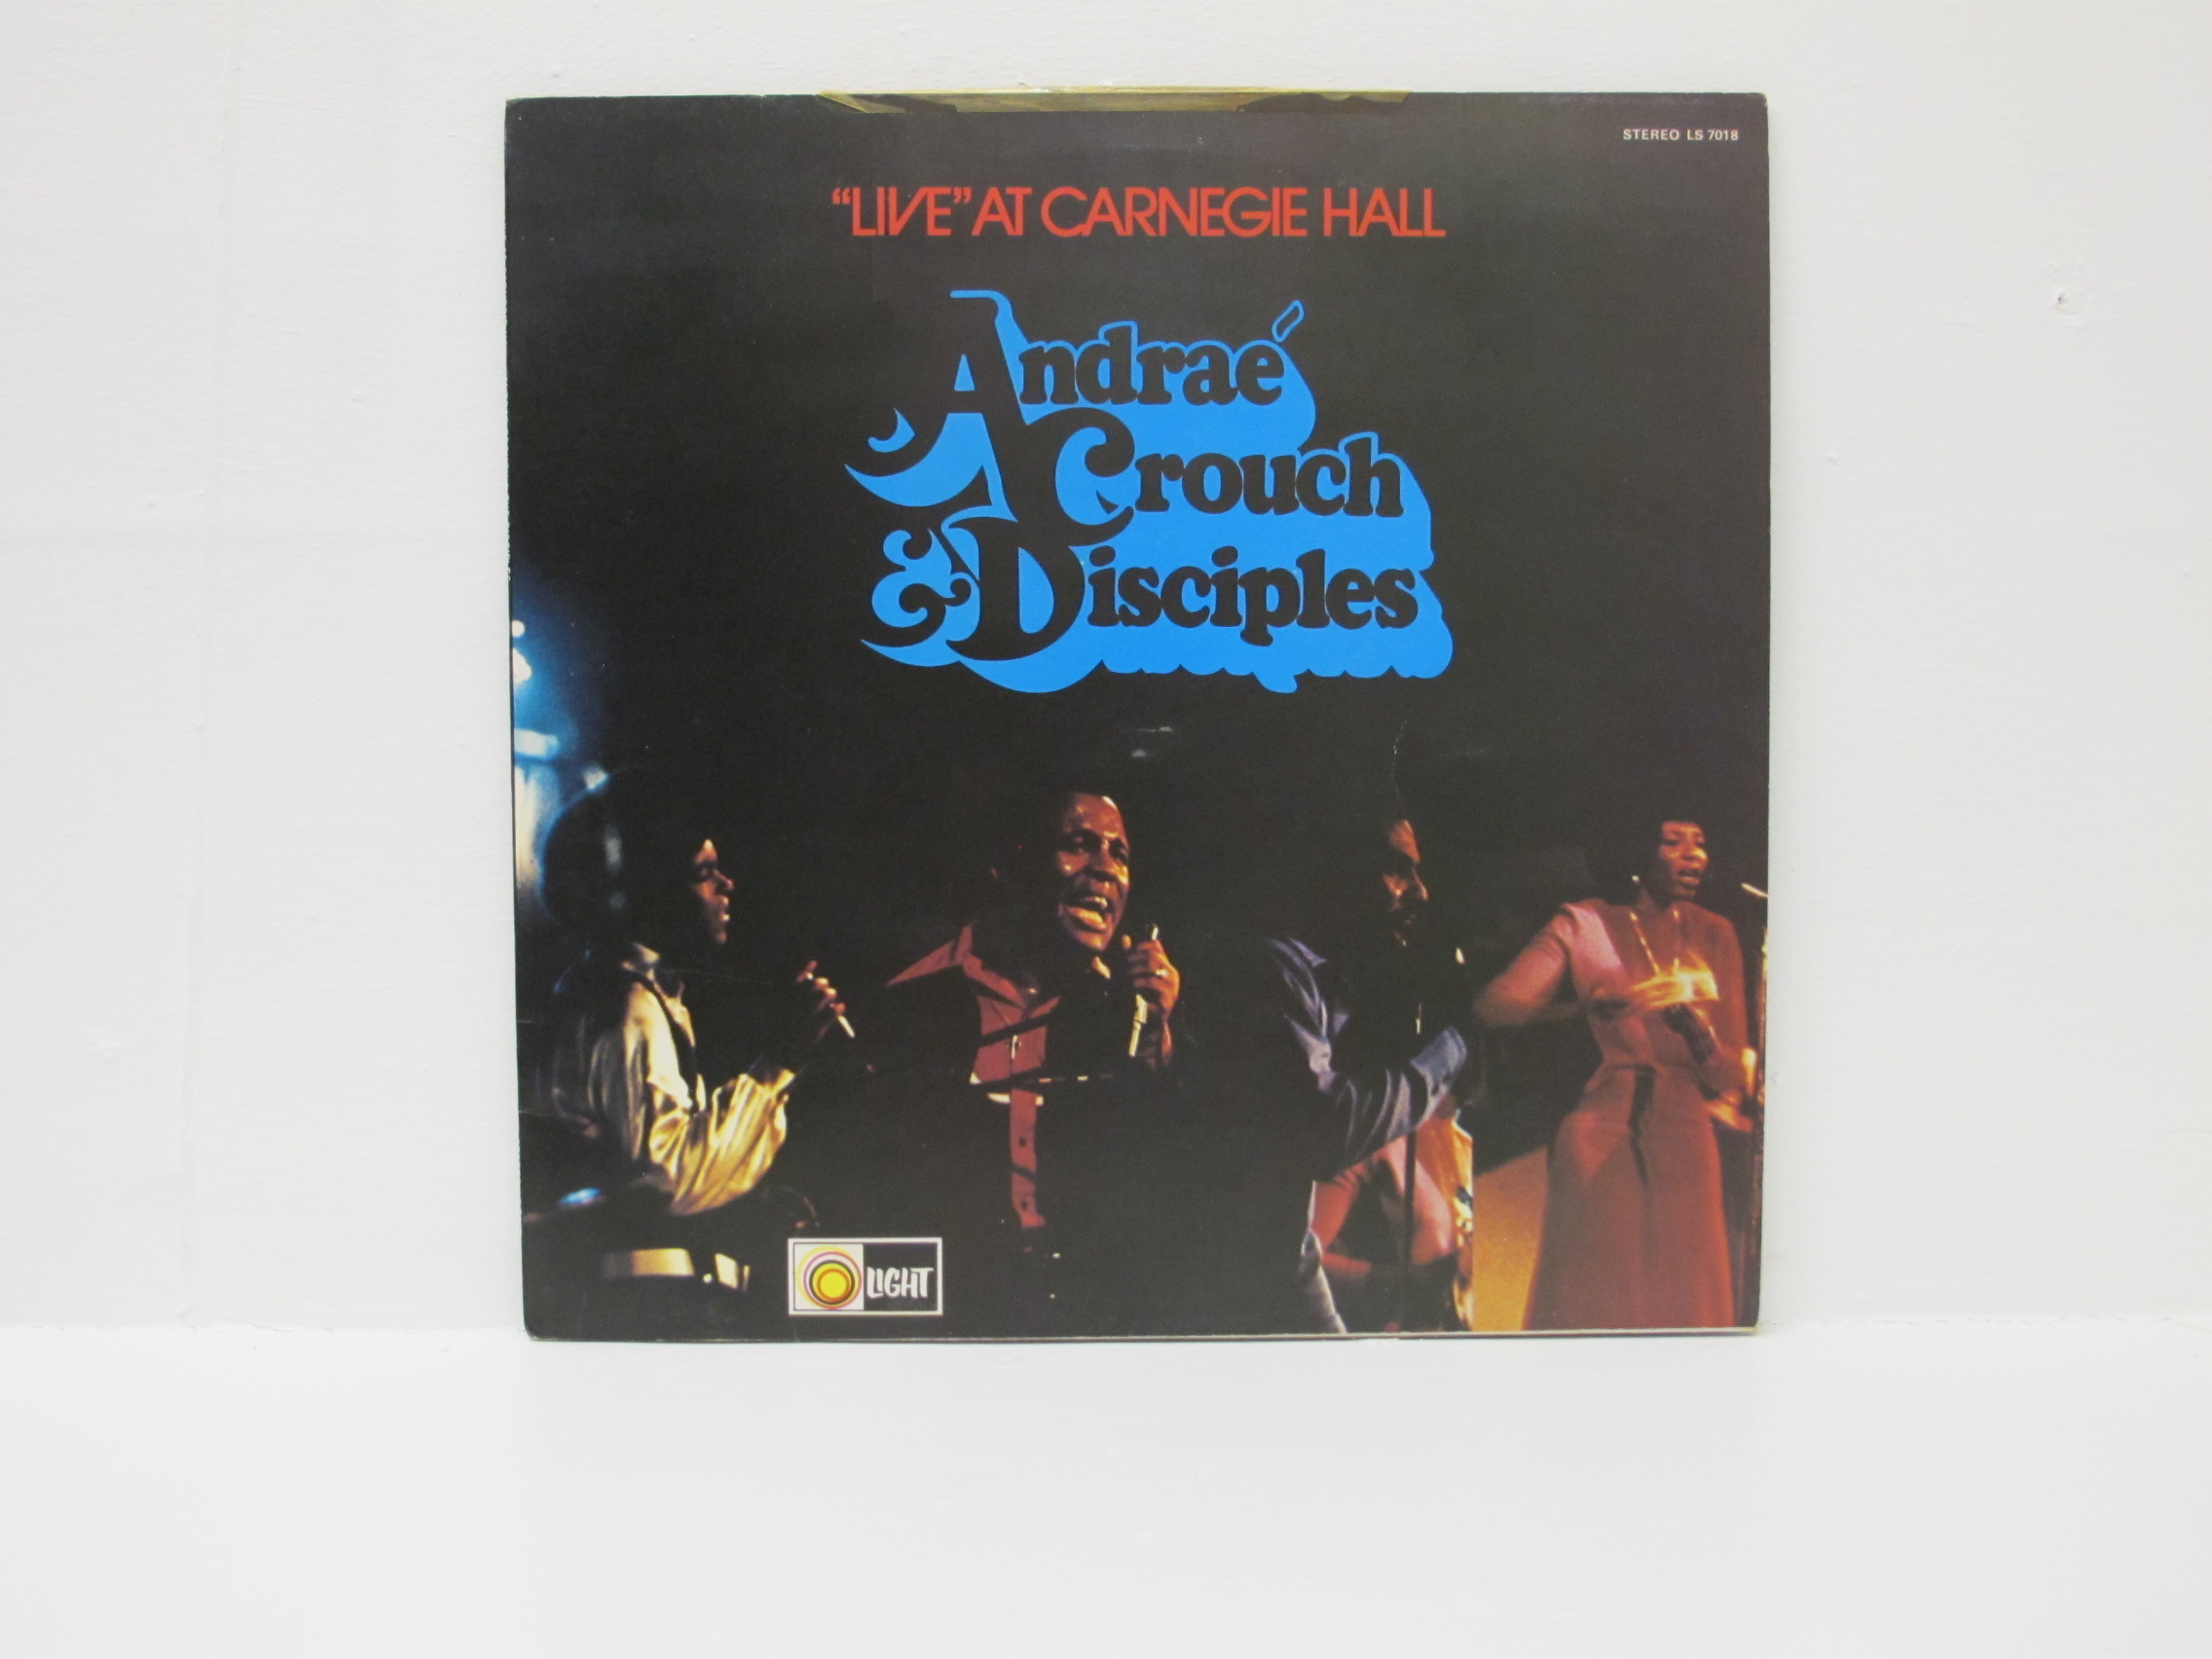 Andraé Crouch & Disciples - Live At Carnegie Hall